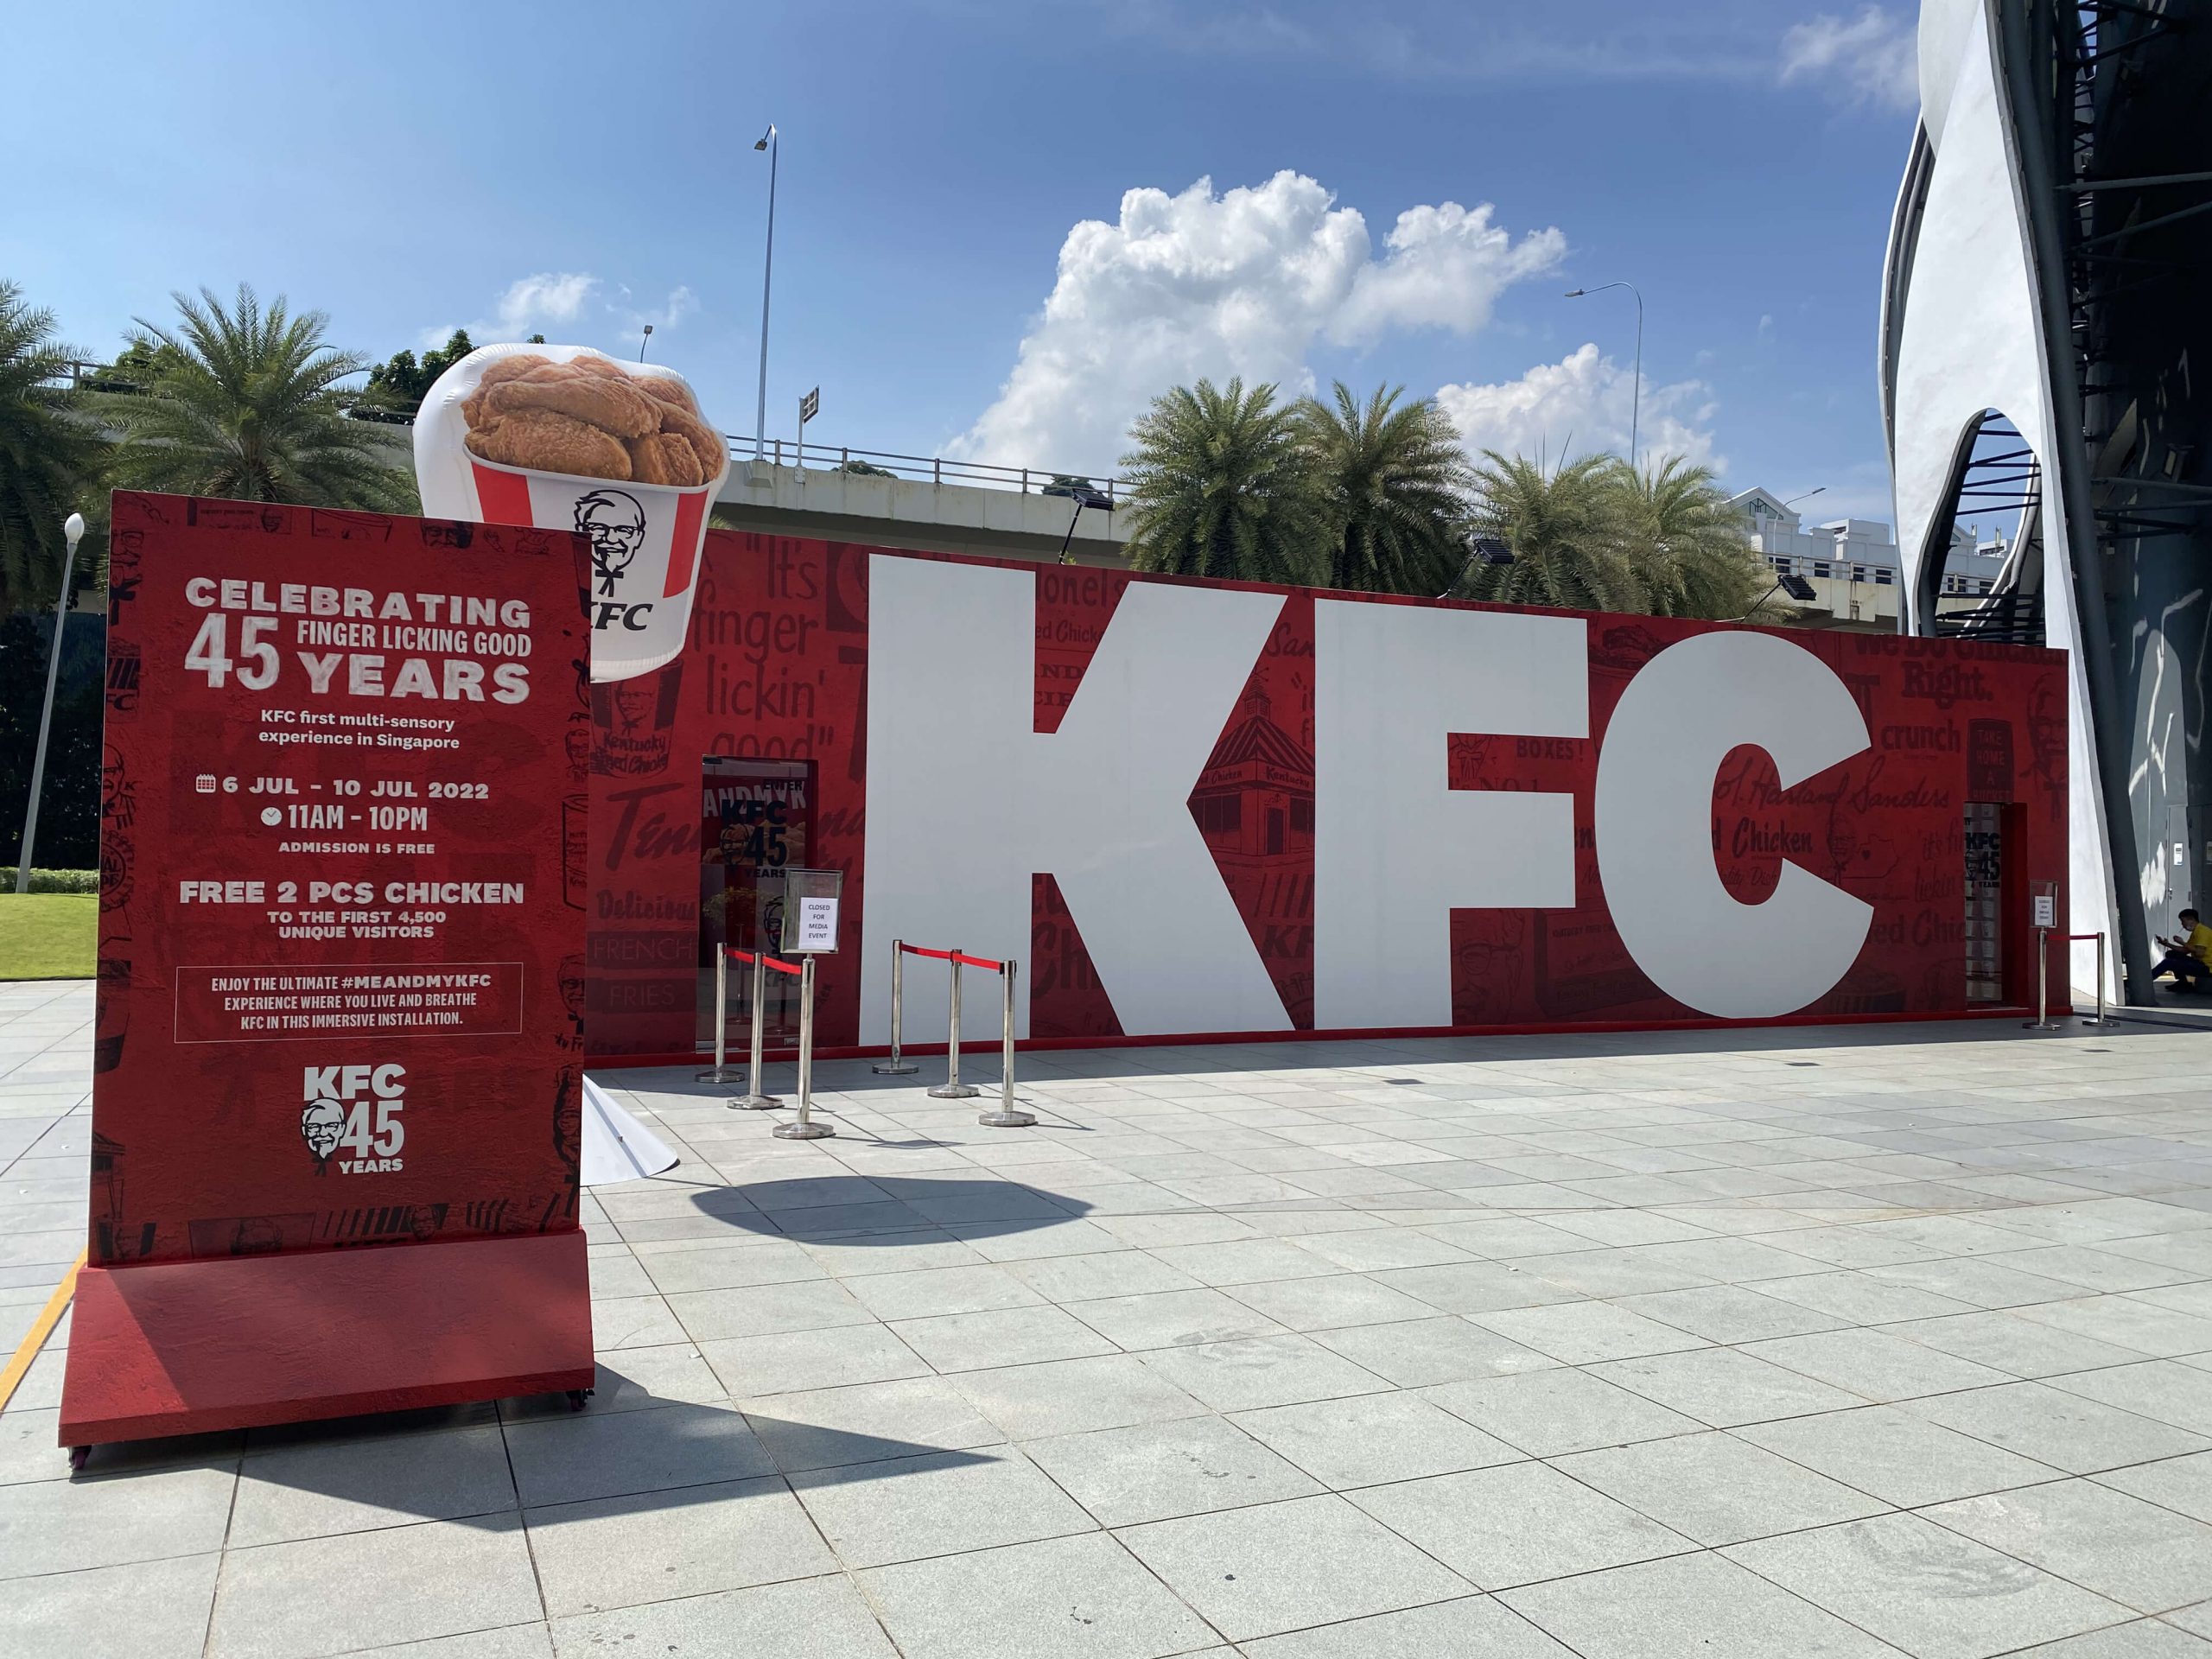 KFC-themed installation at VivoCity to mark chain’s 45th year in Singapore